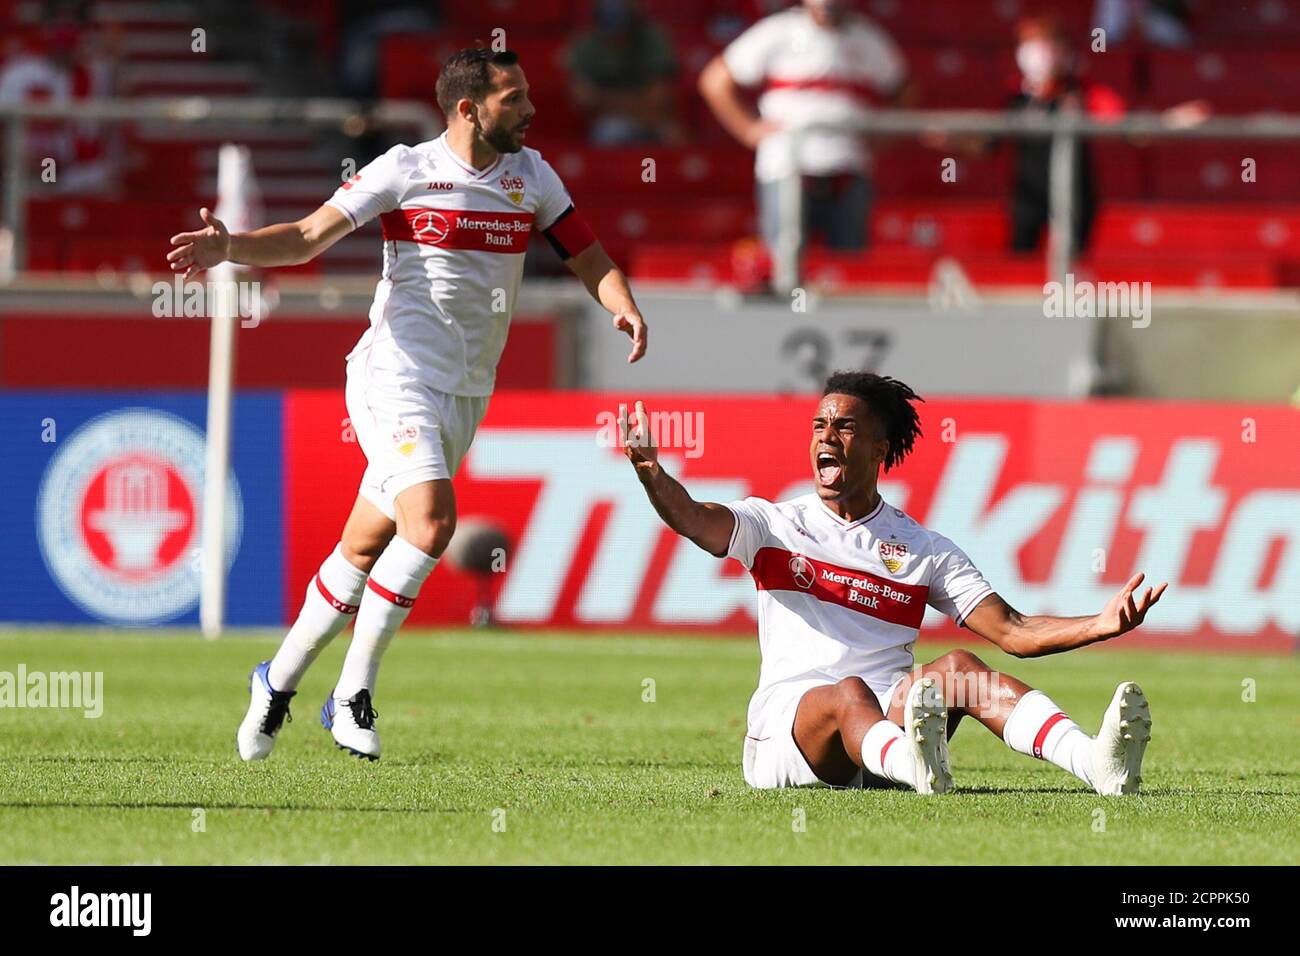 Stuttgart, Germany. 19th Sep, 2020. Football: Bundesliga, VfB Stuttgart - SC Freiburg, 1st matchday, Mercedes-Benz Arena. Stuttgart's Gonzalo Castro (l) and Stuttgart's Daniel Didavi (r) react in the match. Credit: Tom Weller/dpa - IMPORTANT NOTE: In accordance with the regulations of the DFL Deutsche Fußball Liga and the DFB Deutscher Fußball-Bund, it is prohibited to exploit or have exploited in the stadium and/or from the game taken photographs in the form of sequence images and/or video-like photo series./dpa/Alamy Live News Stock Photo